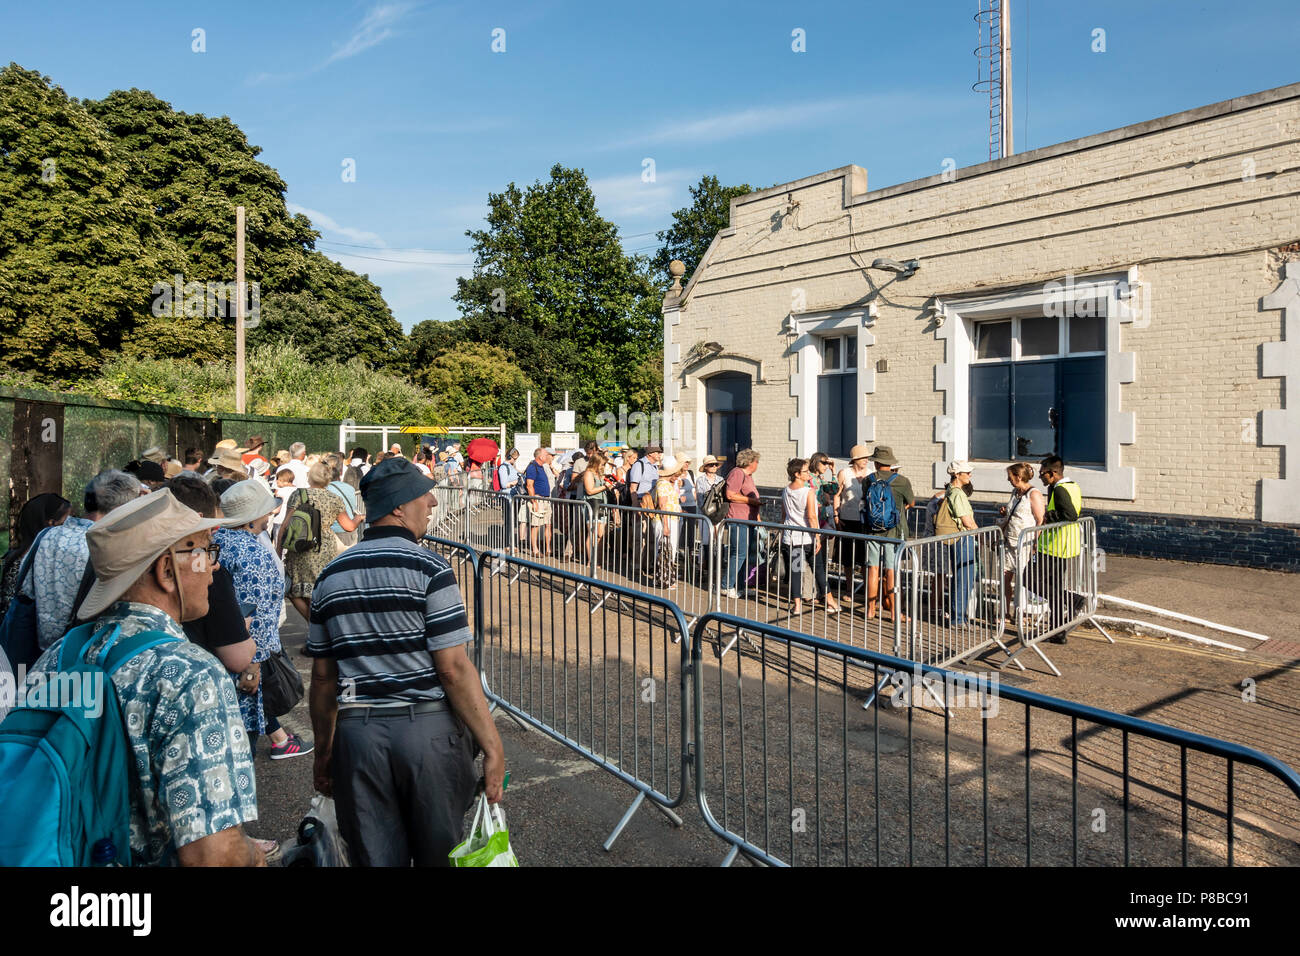 Queue of people at Hampton Court rail station waiting for a delayed train after a cancelled train, having been to Hampton Court Palace flower show. Stock Photo